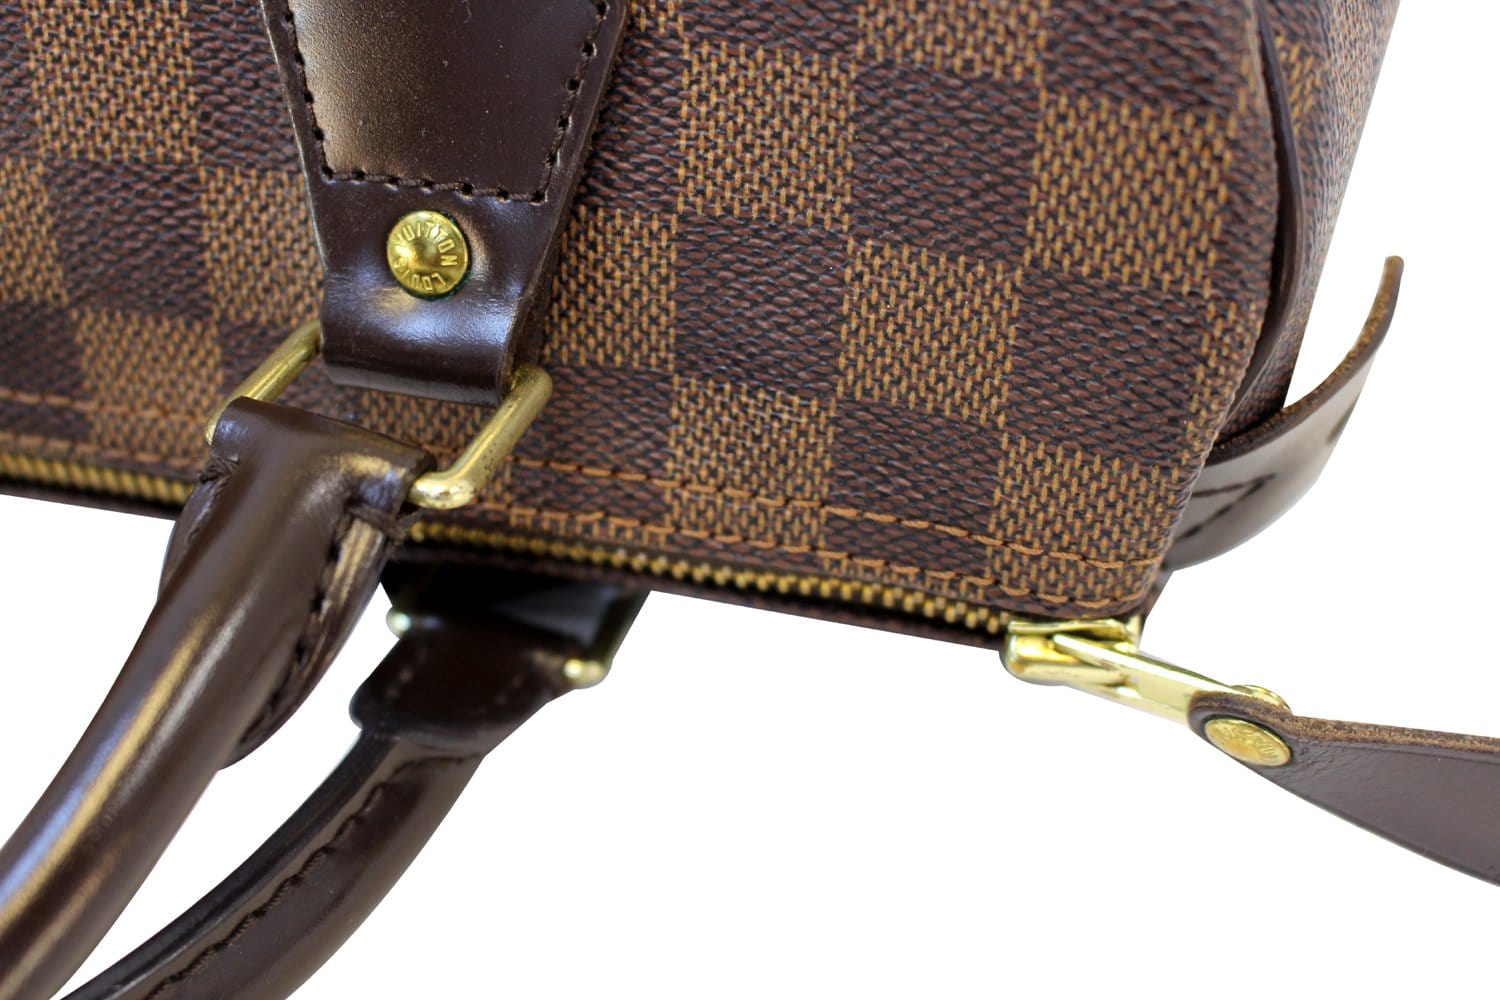 DAY 6 OF 25, THE HISTORY OF LOUIS VUITTON SPEEDY